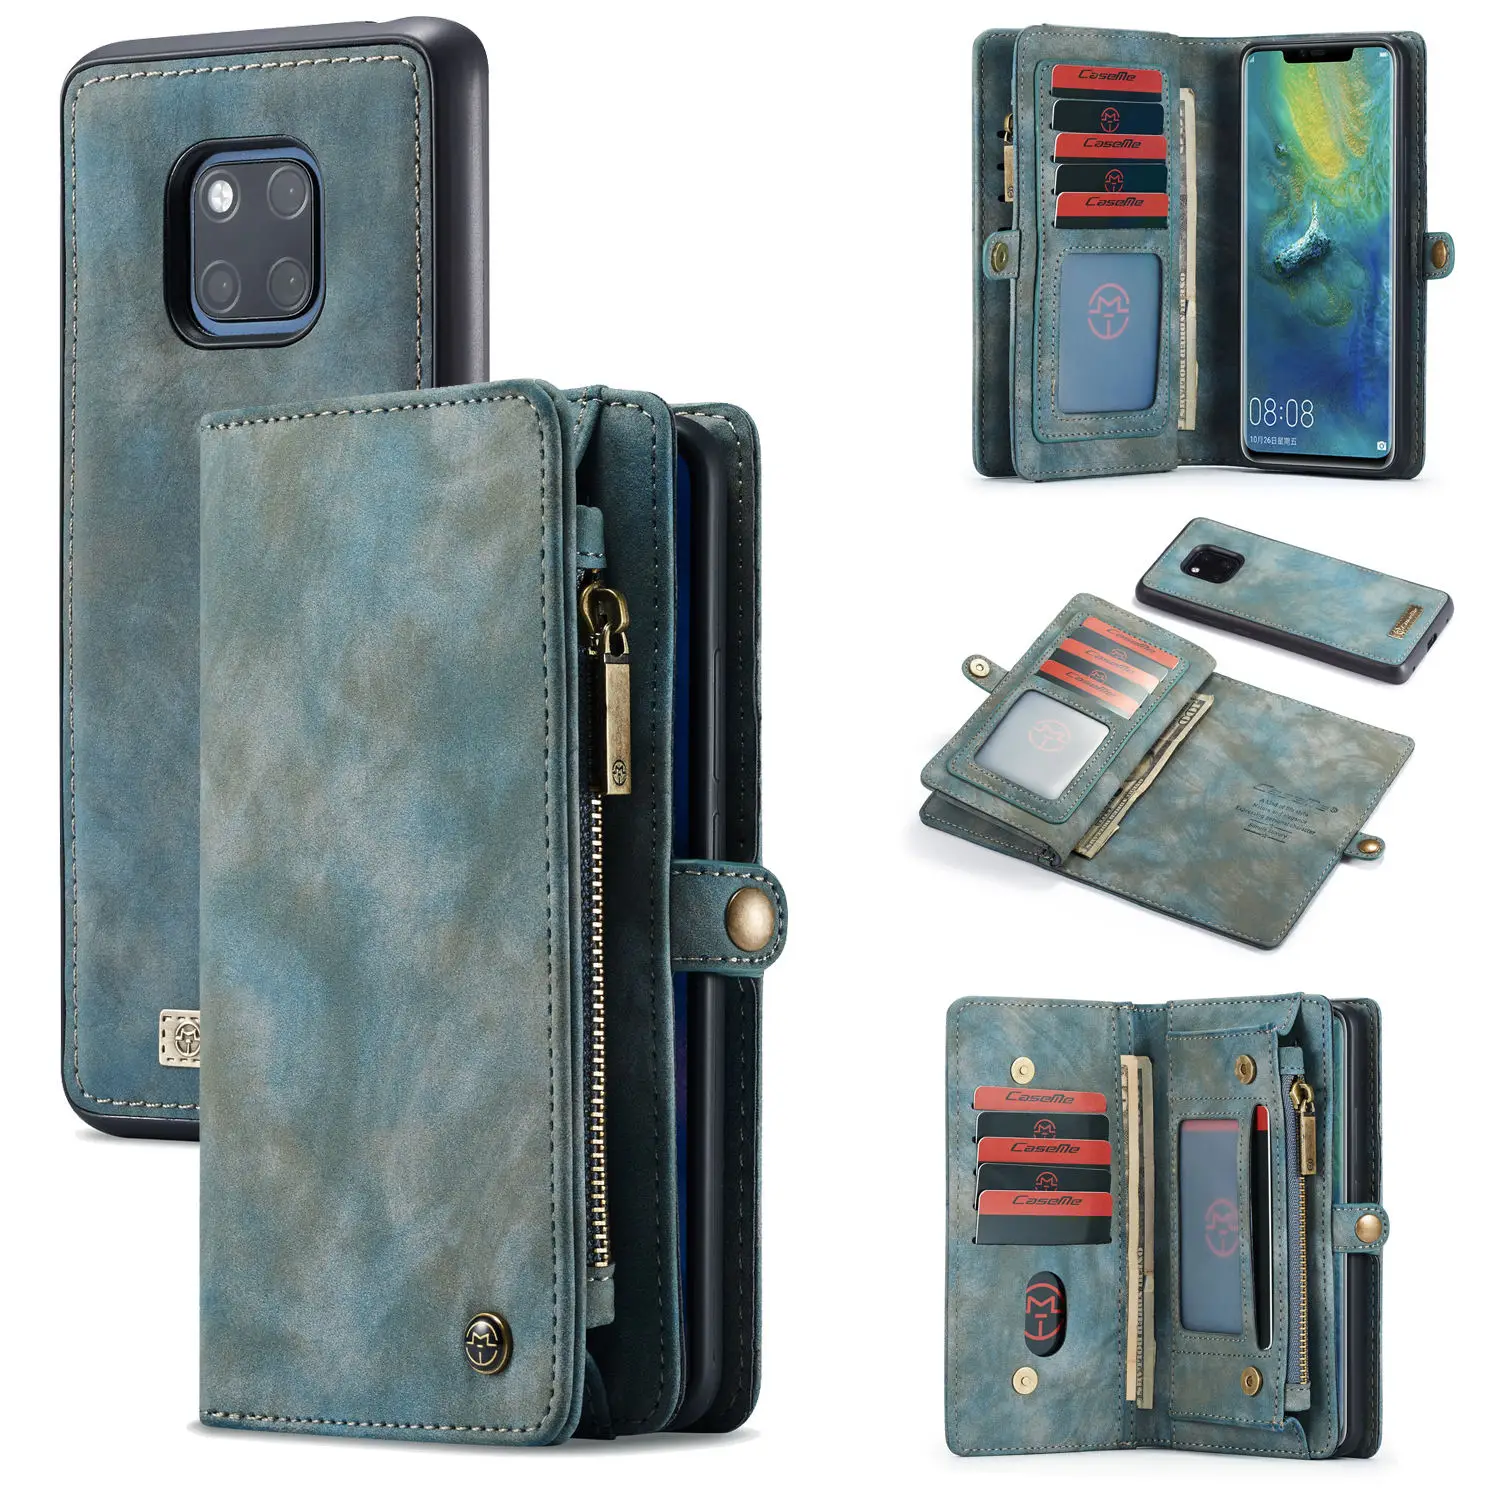 

CaseMe Magnetic Wallet Case For Huawei P30 Lite P30 P20 Mate 20 Pro Cases Flip Detachable Leather Wallet On Cover Phone Cover